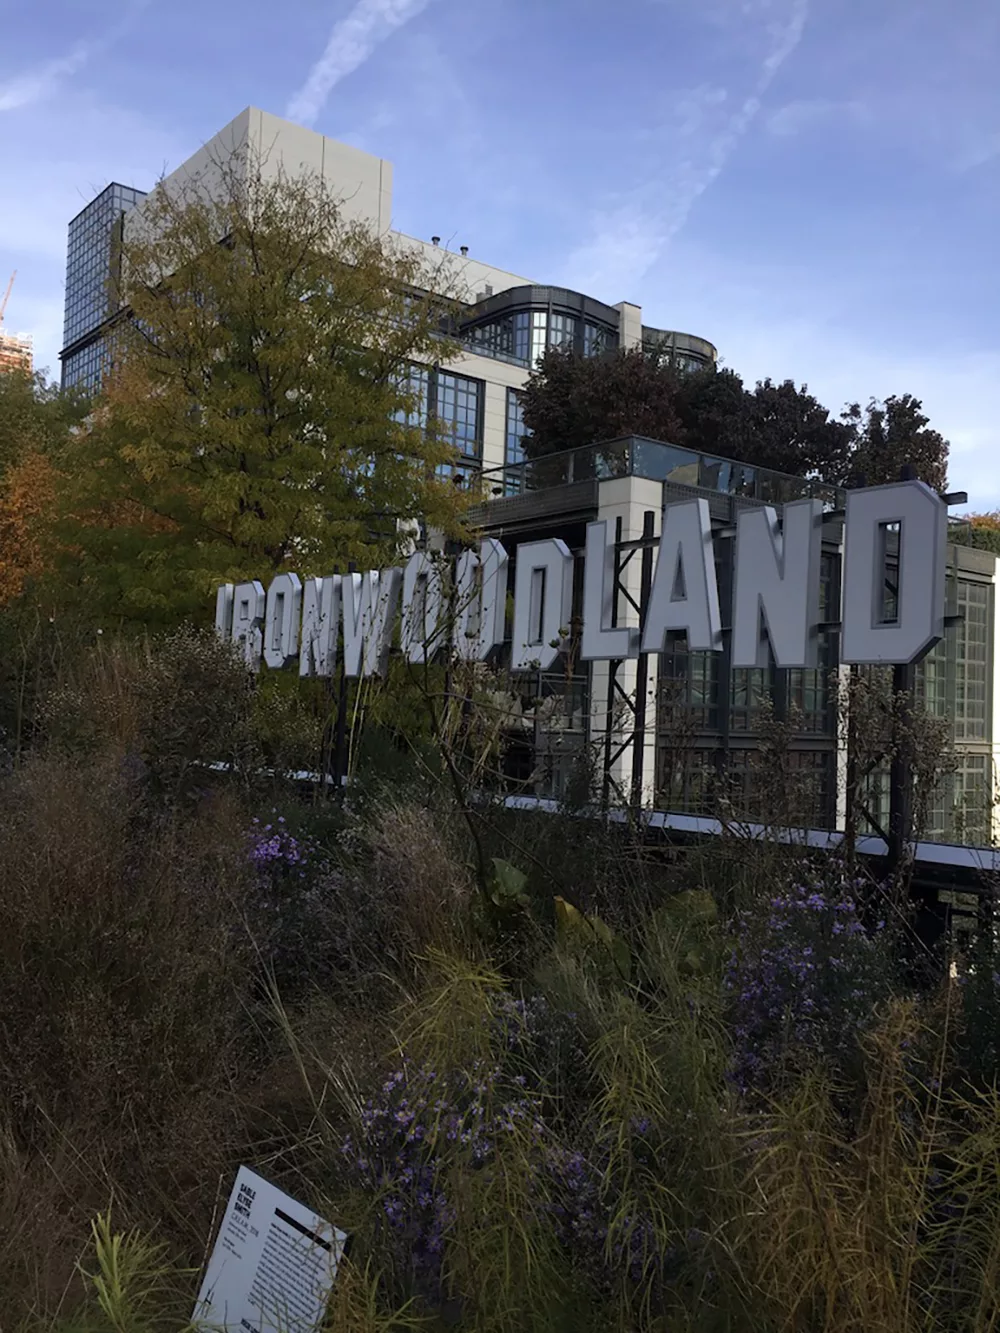 Art installation that says "Ironwood" along the High Line in New York City